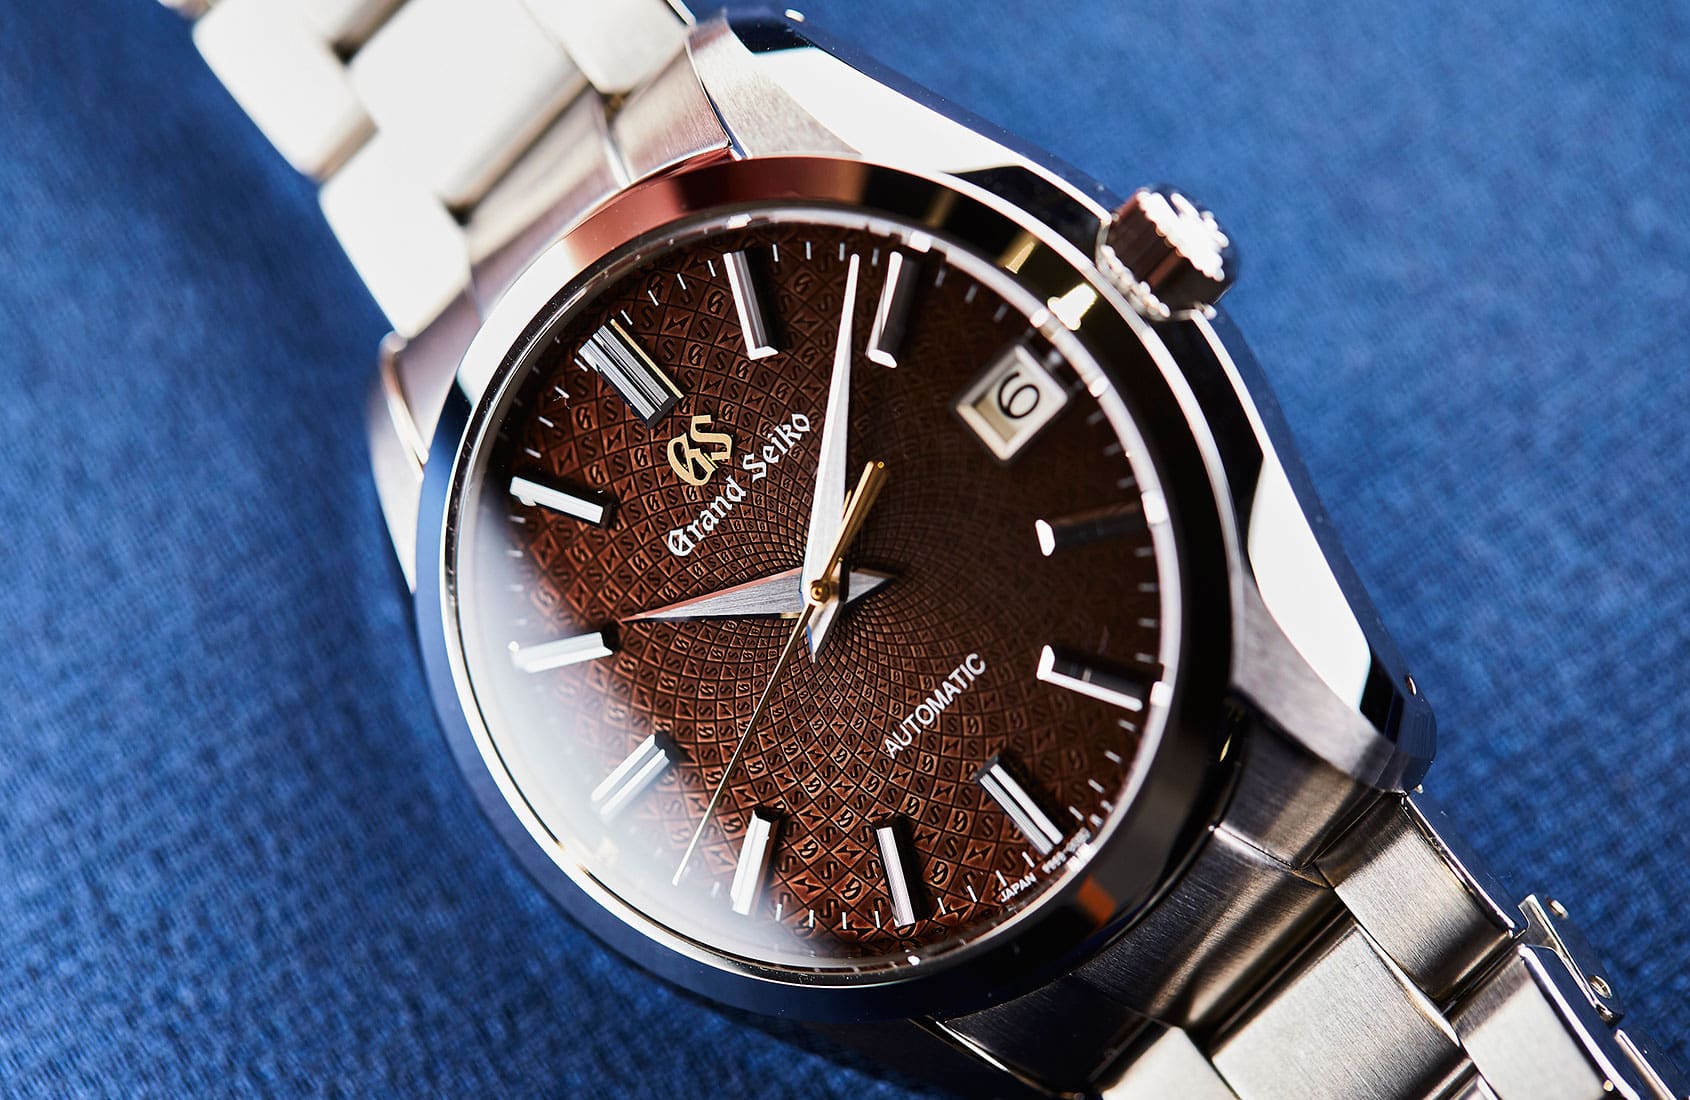 The best JDM Seiko and Grand Seiko watches and how you can get them, even if you don’t live in Japan